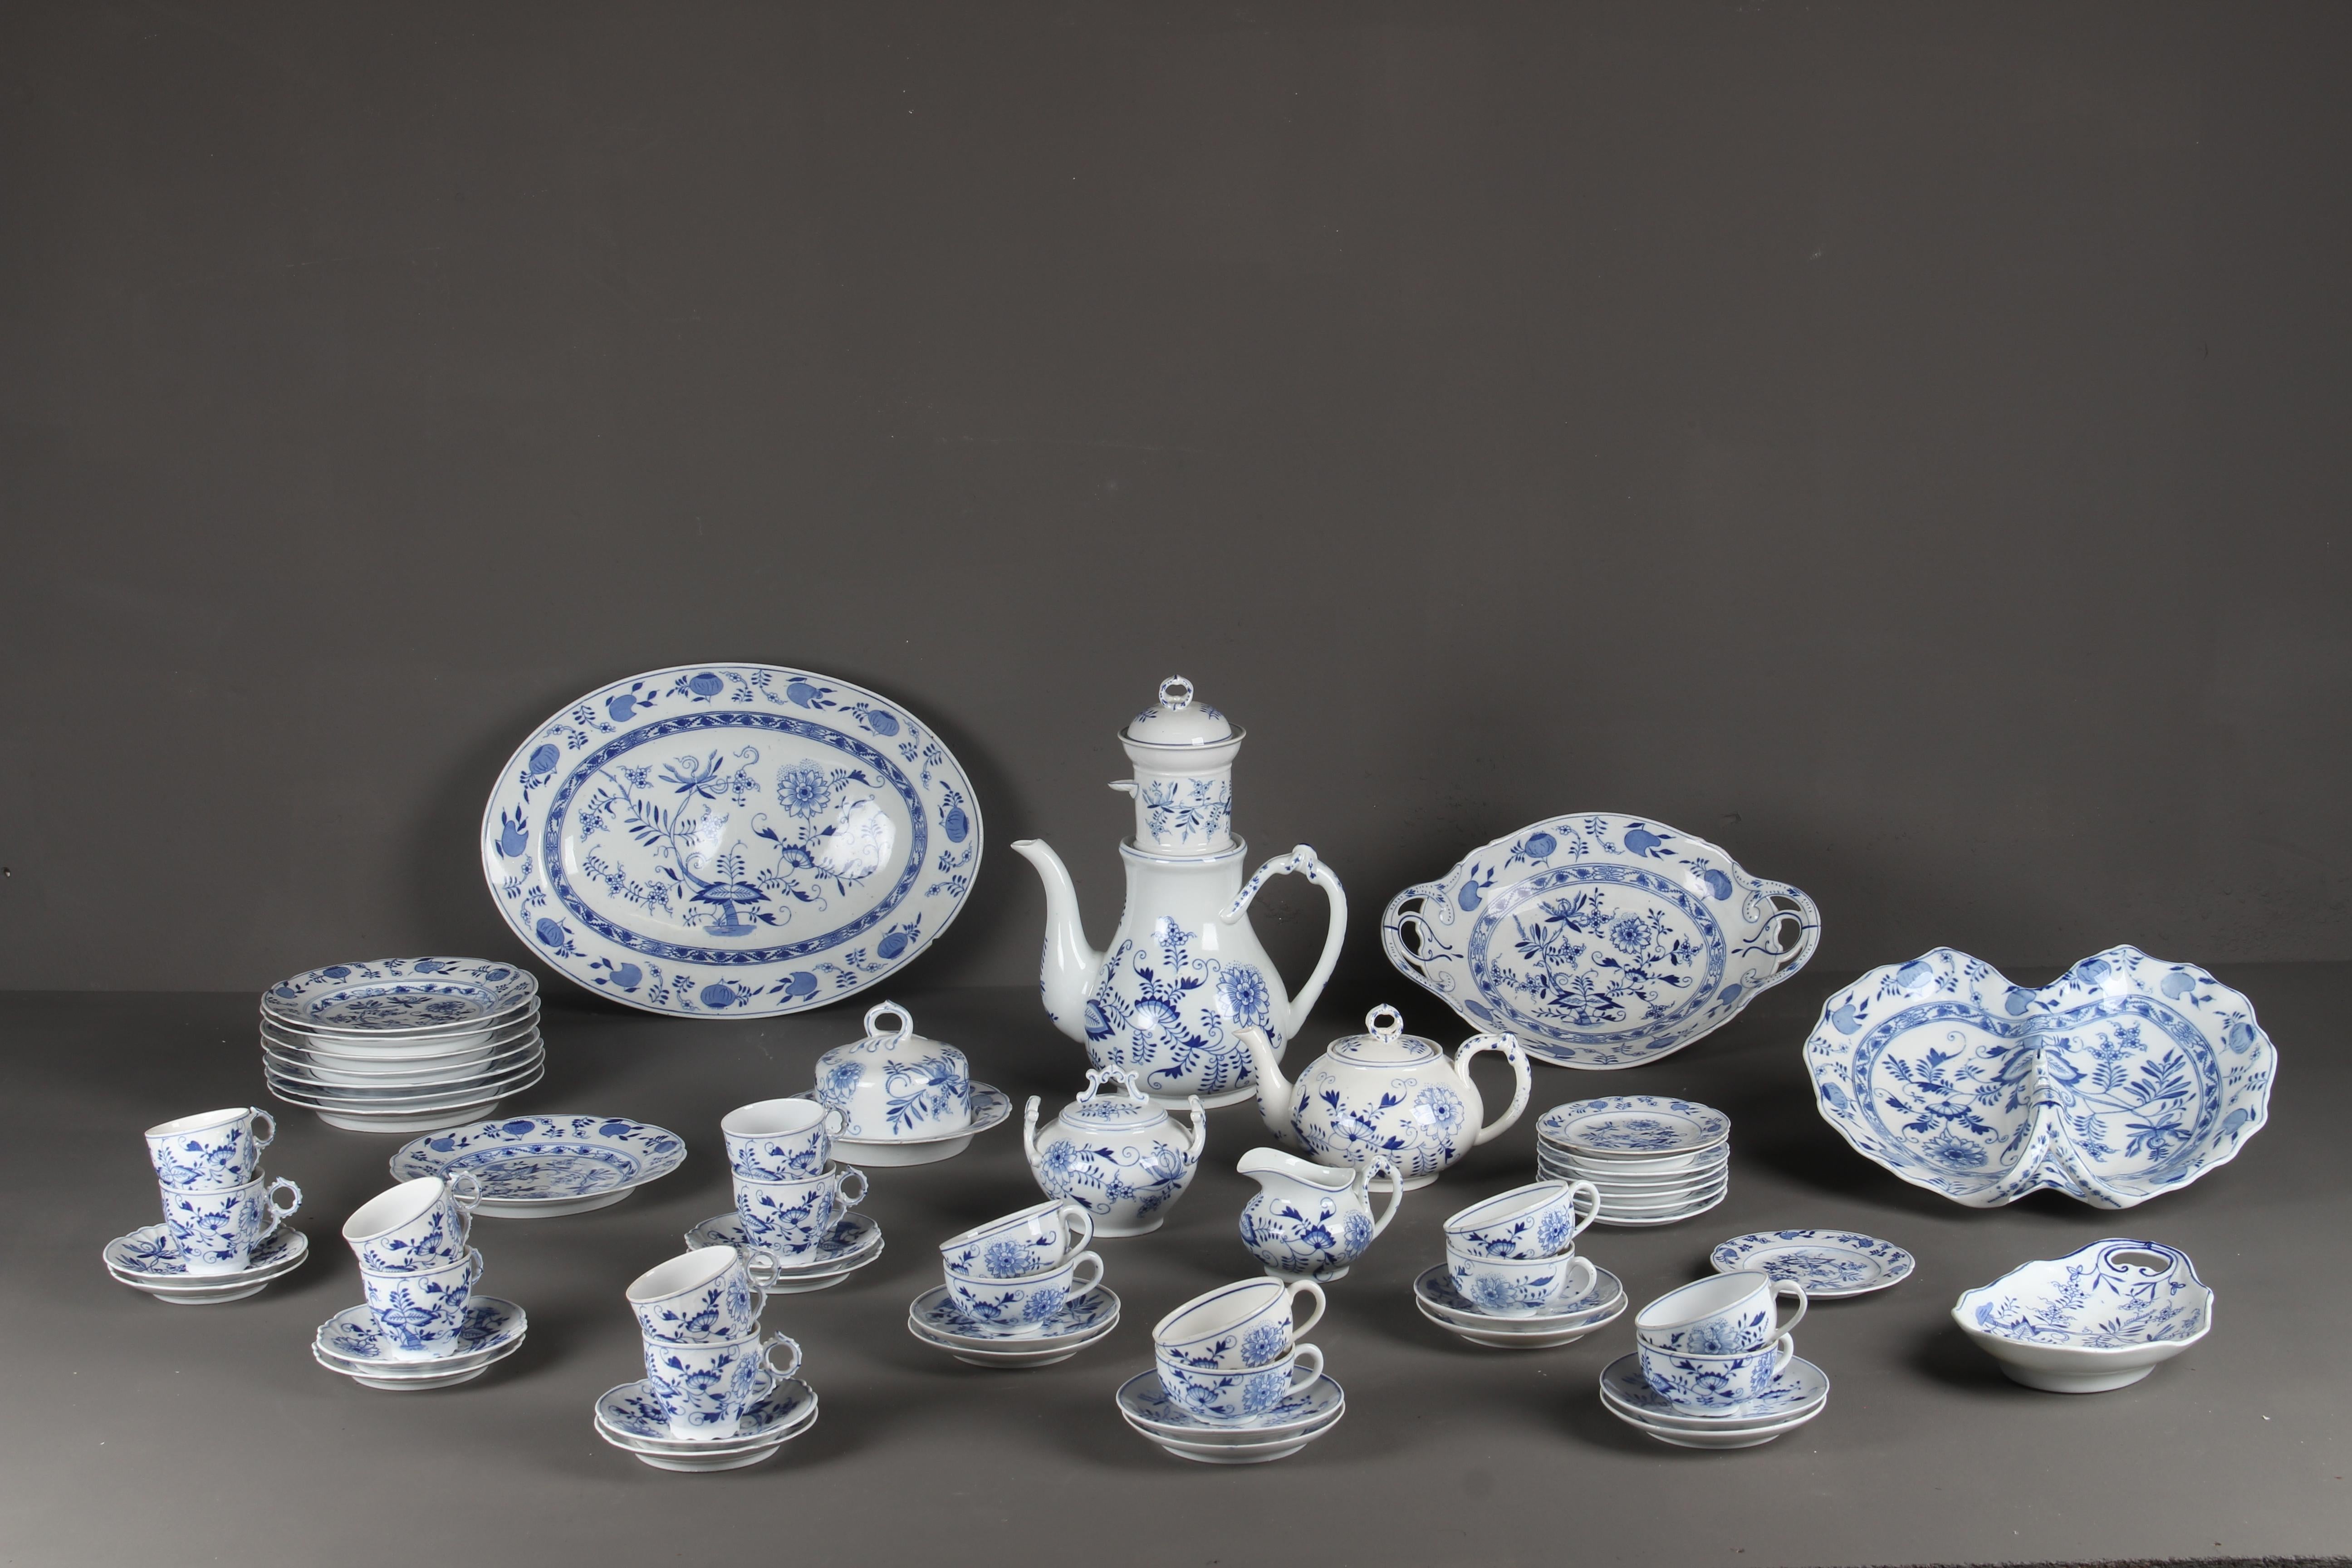 An extremely rare table service set by Louis Regout for Regout Porcelain Pottery Maastricht, 1890.
This 'Zwiebelmuster' motif was also used by Meissen in Germany. 
The city of Maastricht was and is a well-known cradle for ceramics, pottery and